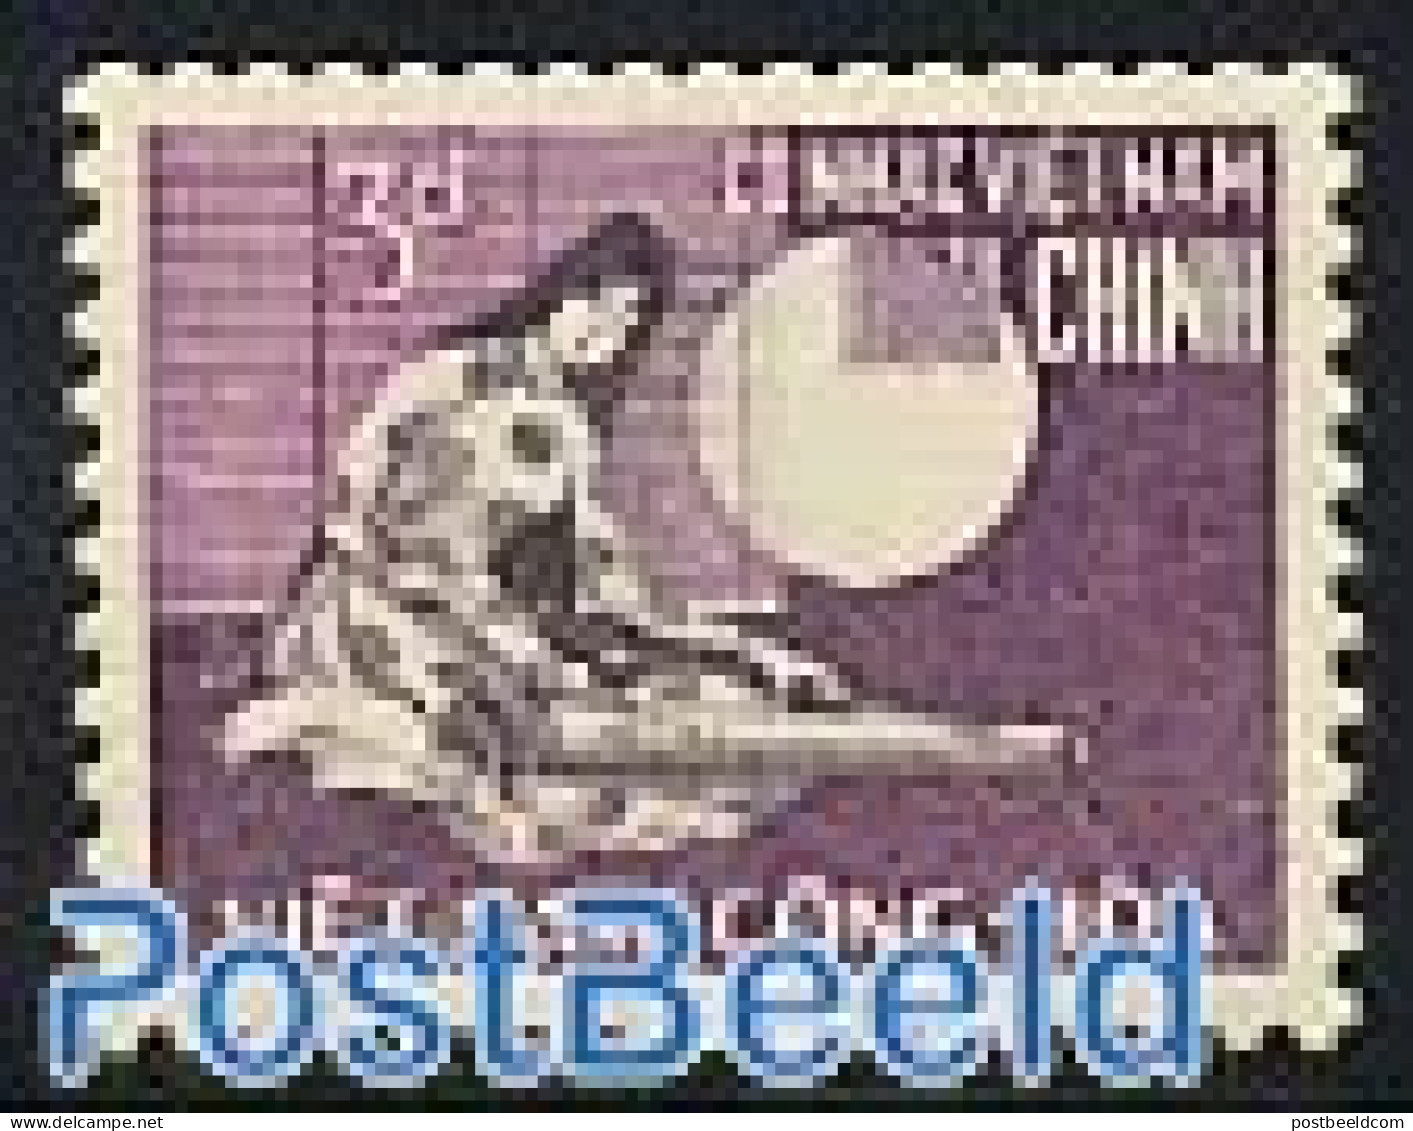 Vietnam, South 1967 Floating Post Office 1v, Mint NH, Post - Post